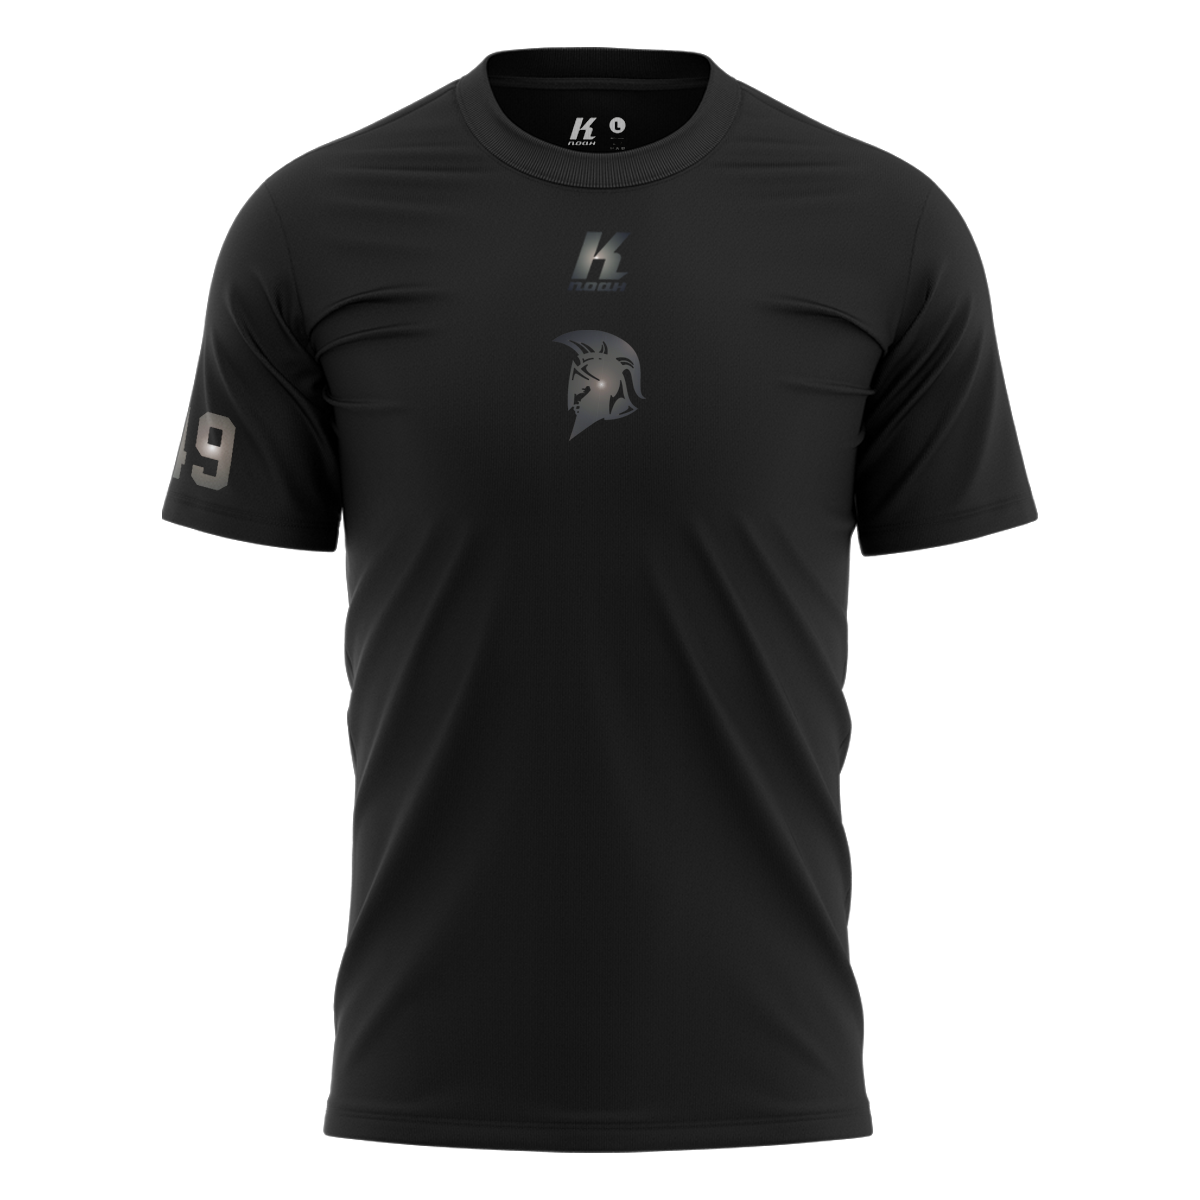 Spartans "Blackline" K.Tech Sports Tee S8000 with Playernumber/Initials